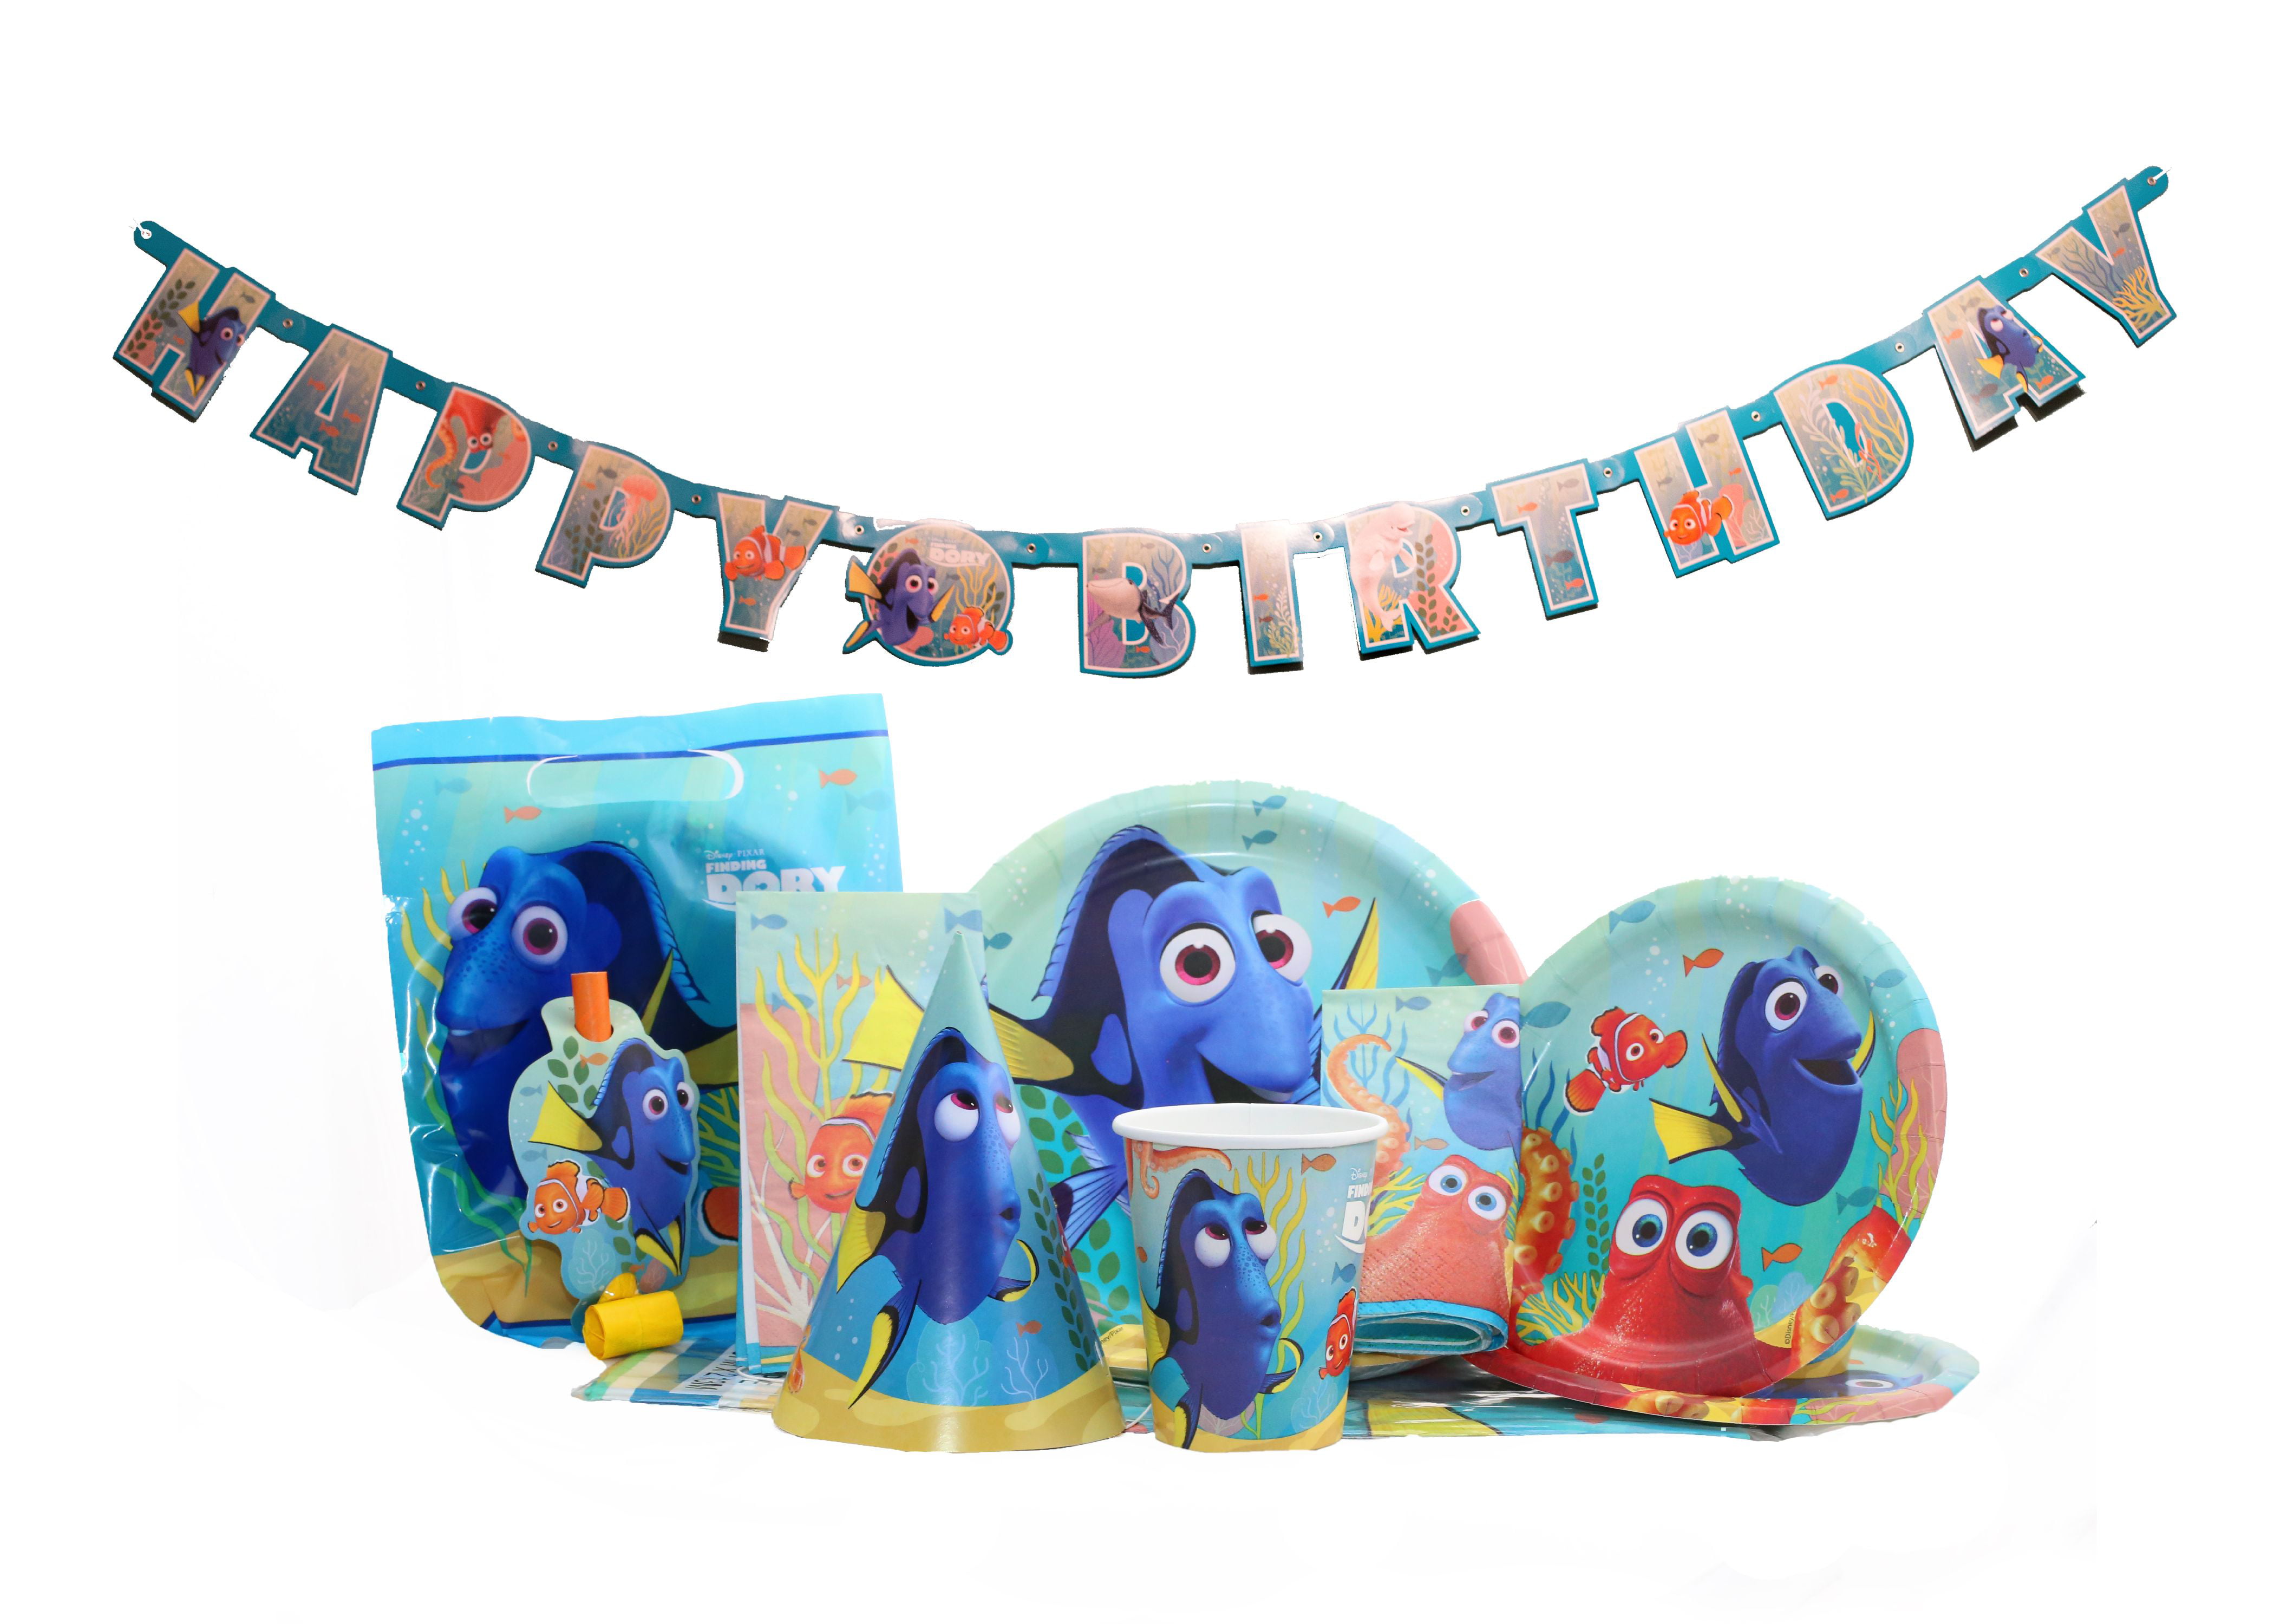 Disney Finding Dory 6 Item Party Bundle Table Cover Plates Cups Napkins Bags....